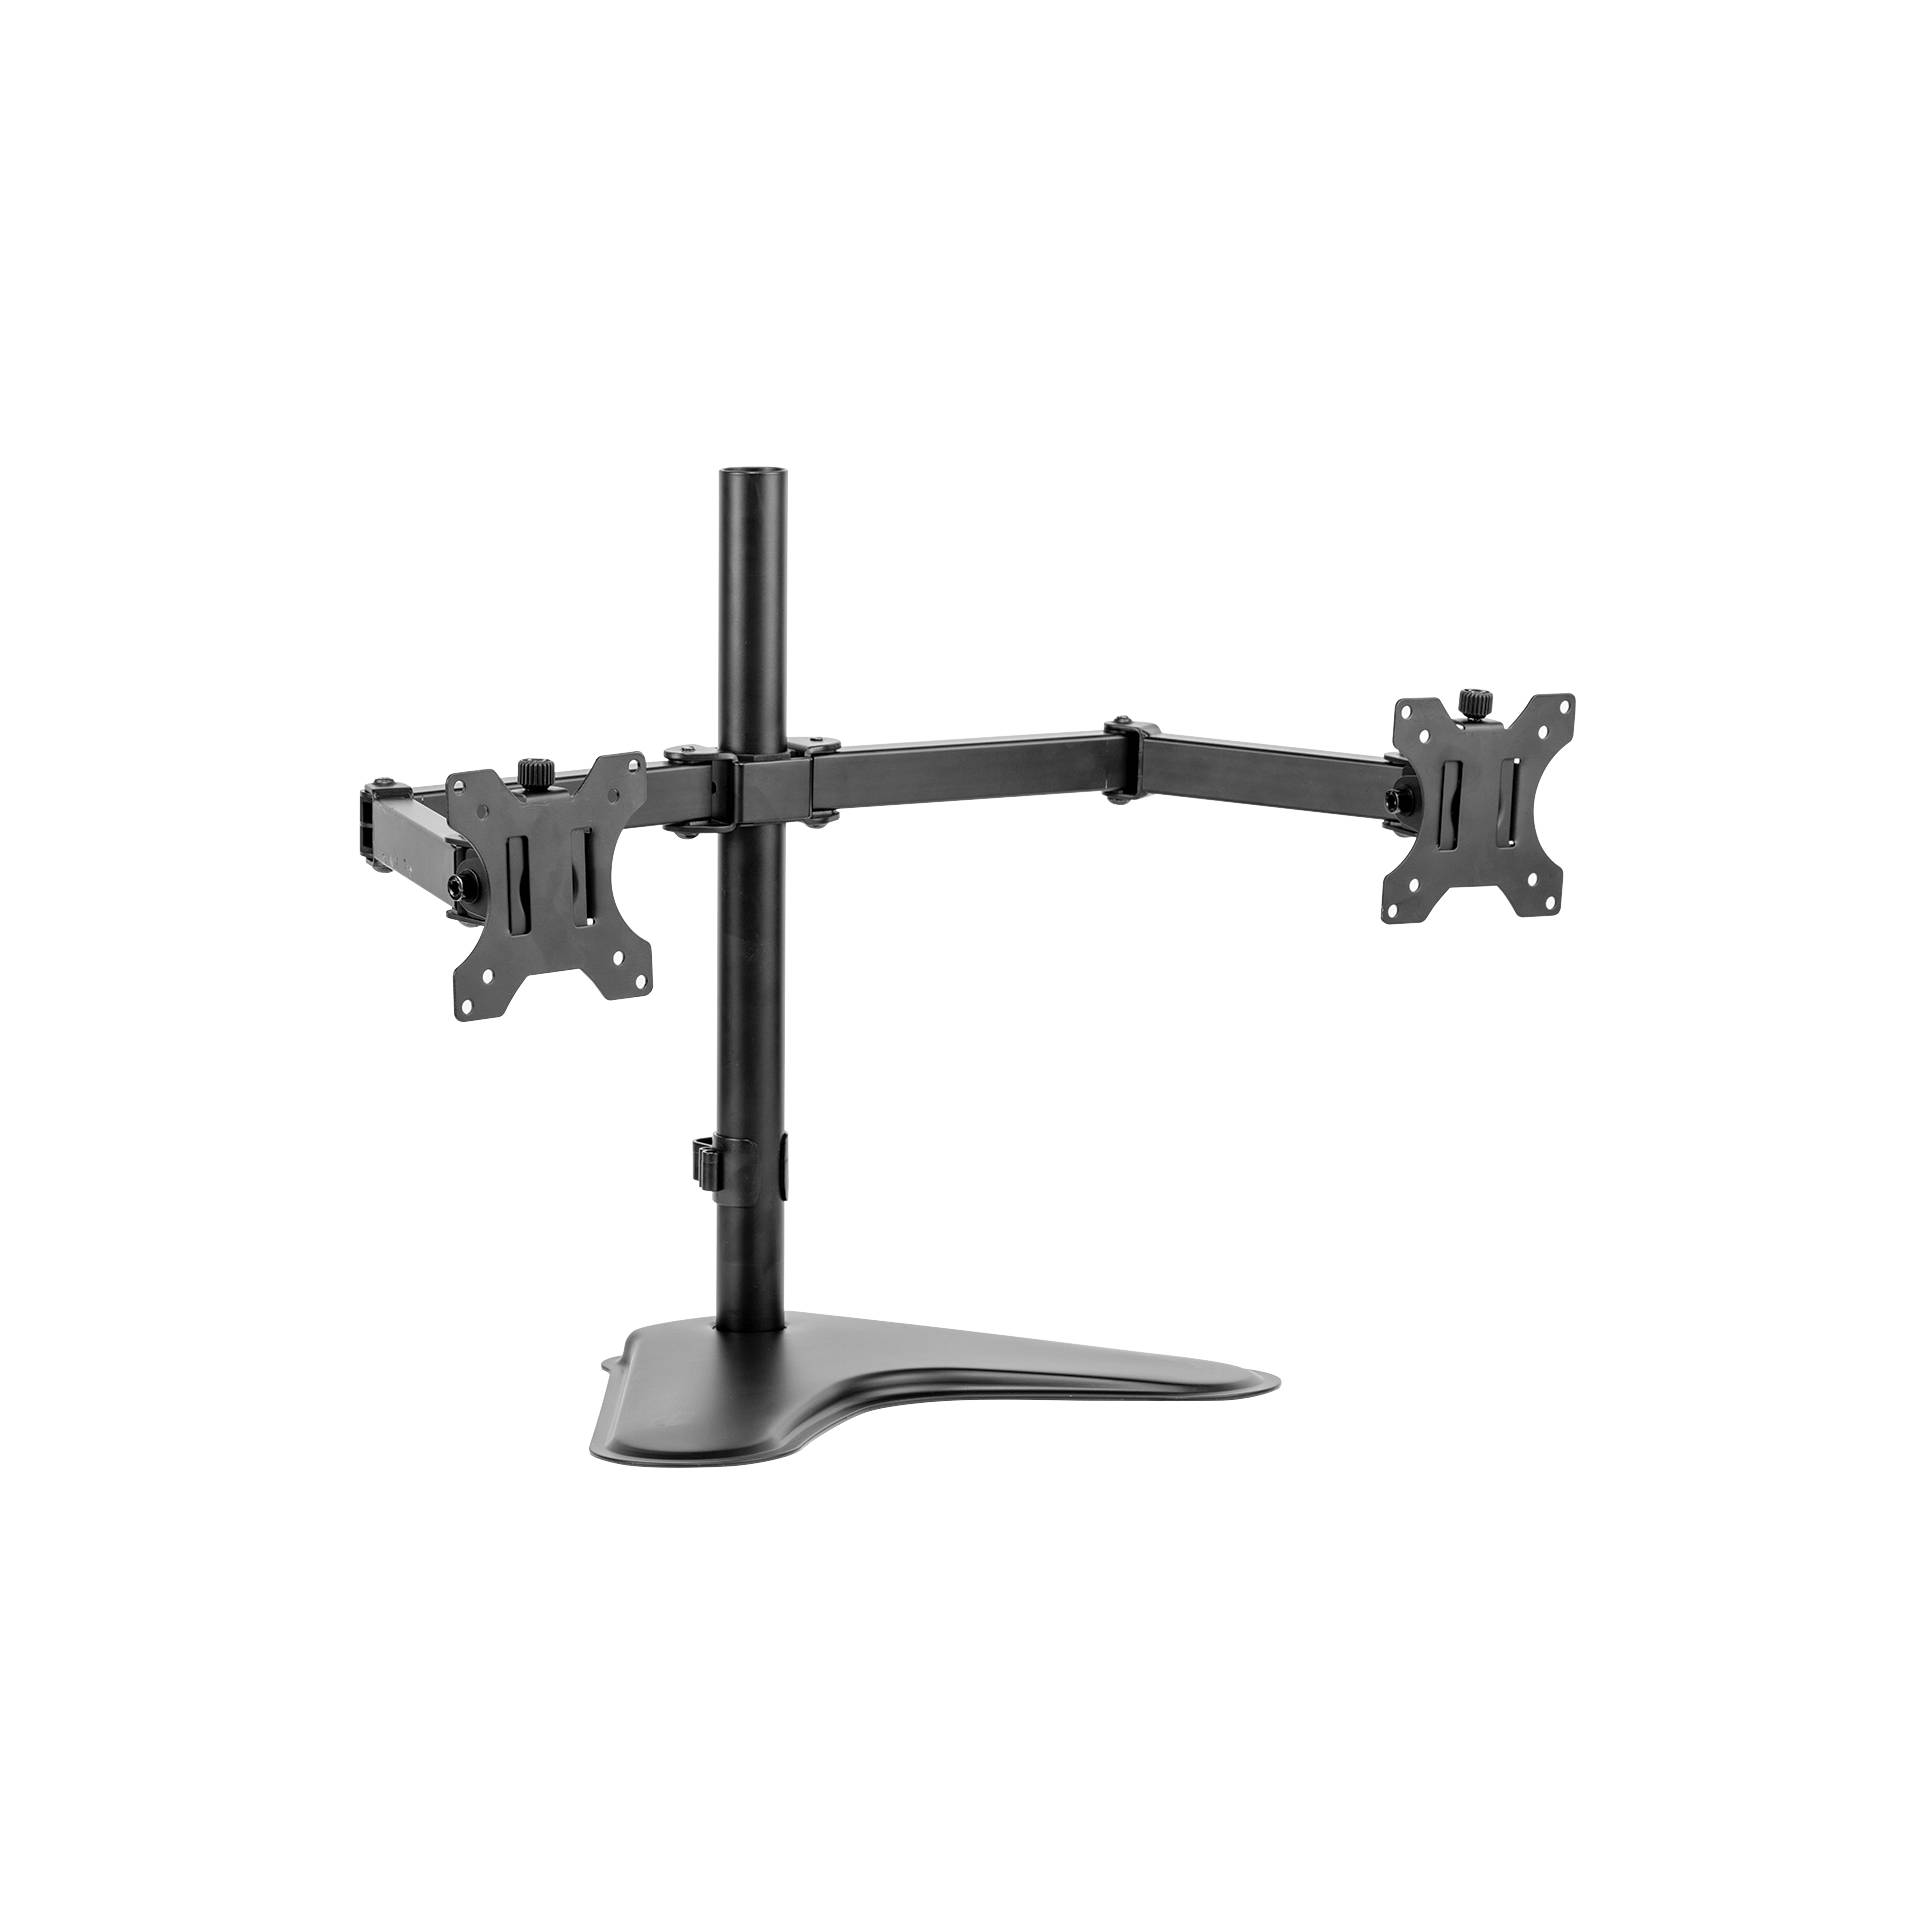 Fellowes Professional Series free standing double arm